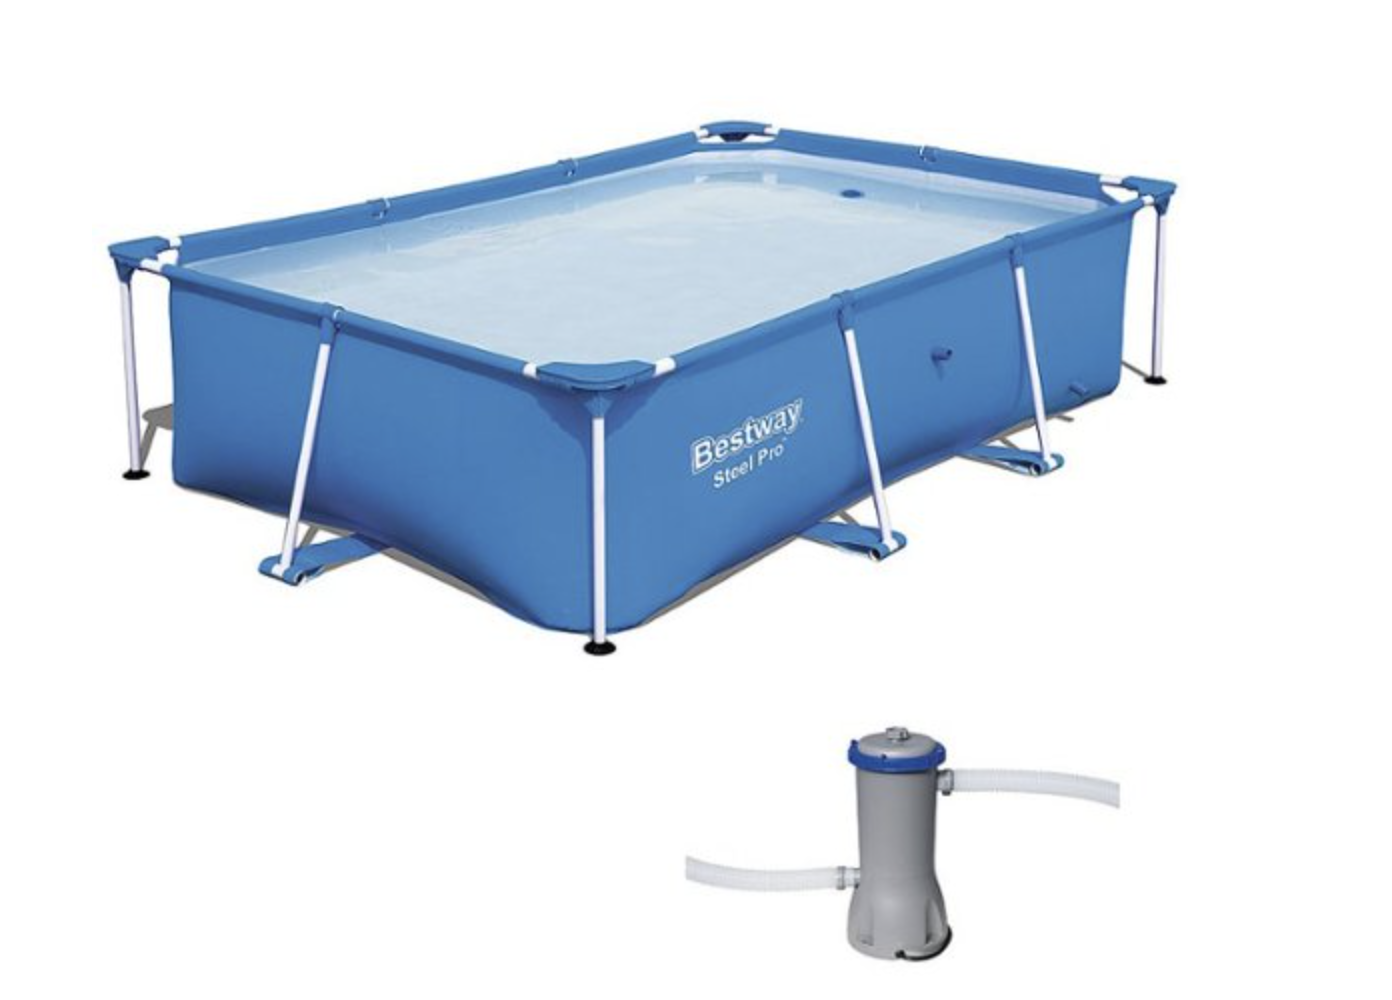 Bestway Pools On Sale For Super Low Prices